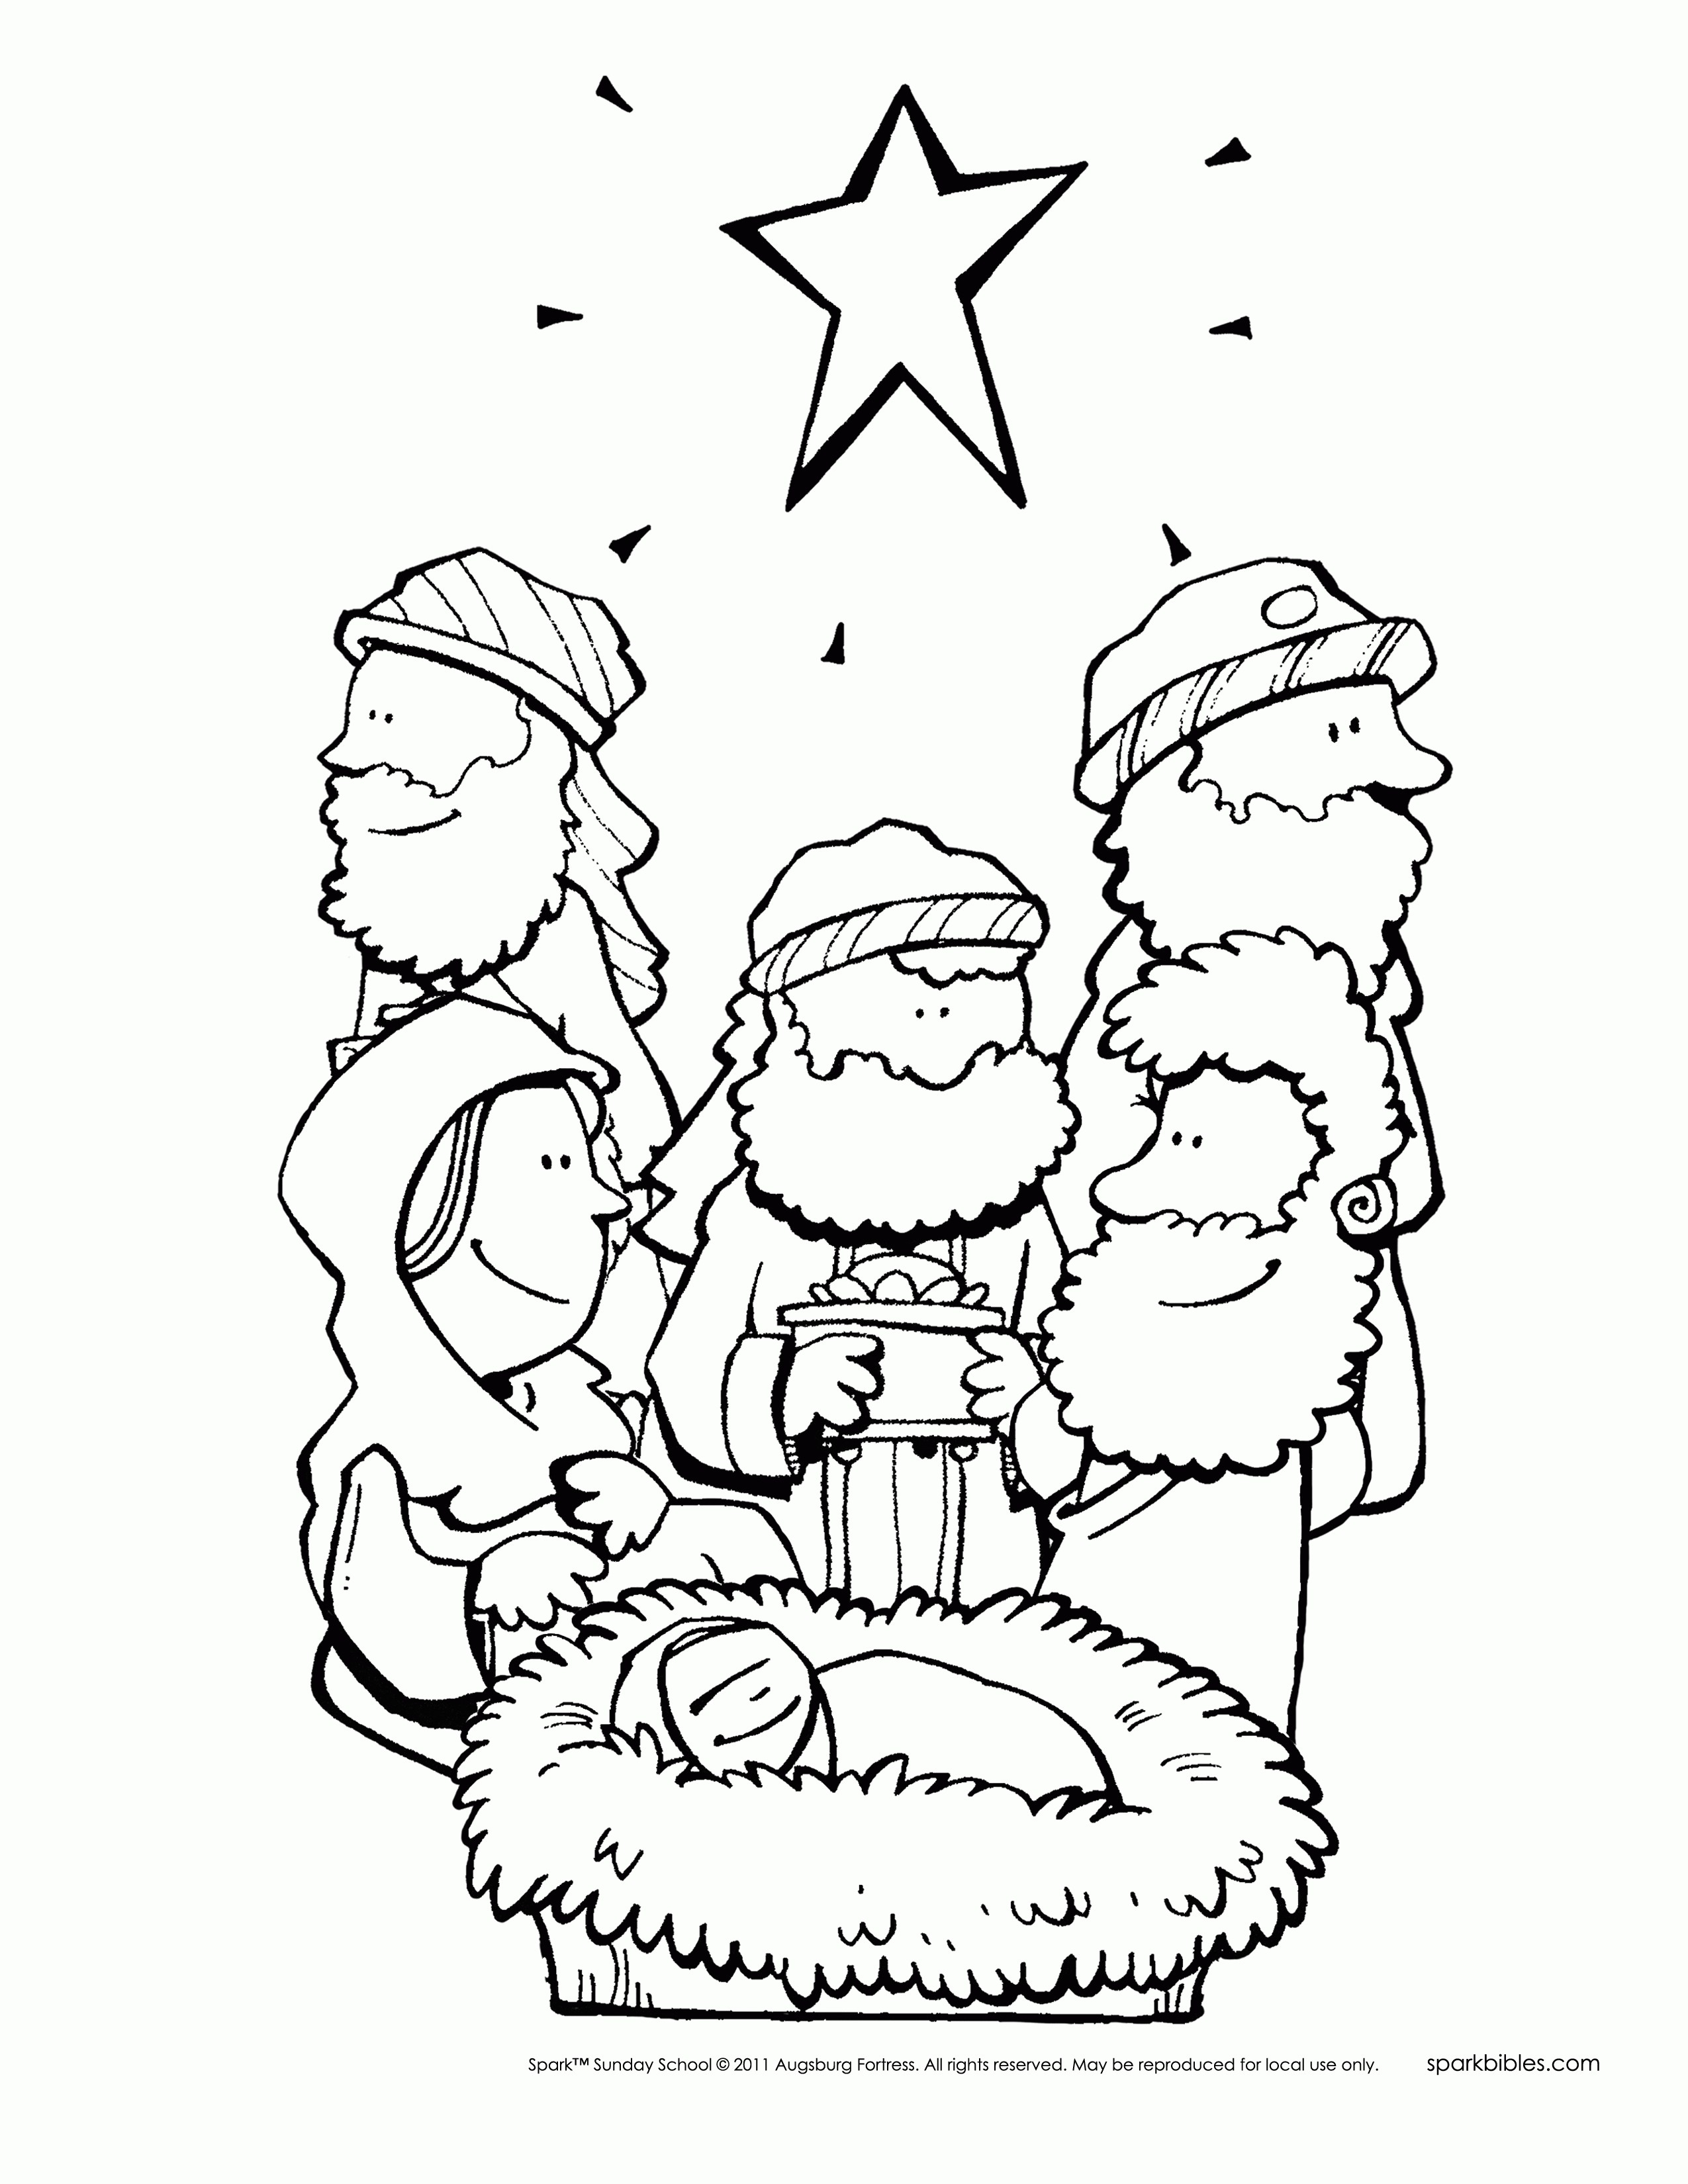 Coloring Pages Bible Stories Preschoolers Awesome Coloring Pages 53 - Free Printable Bible Characters Coloring Pages